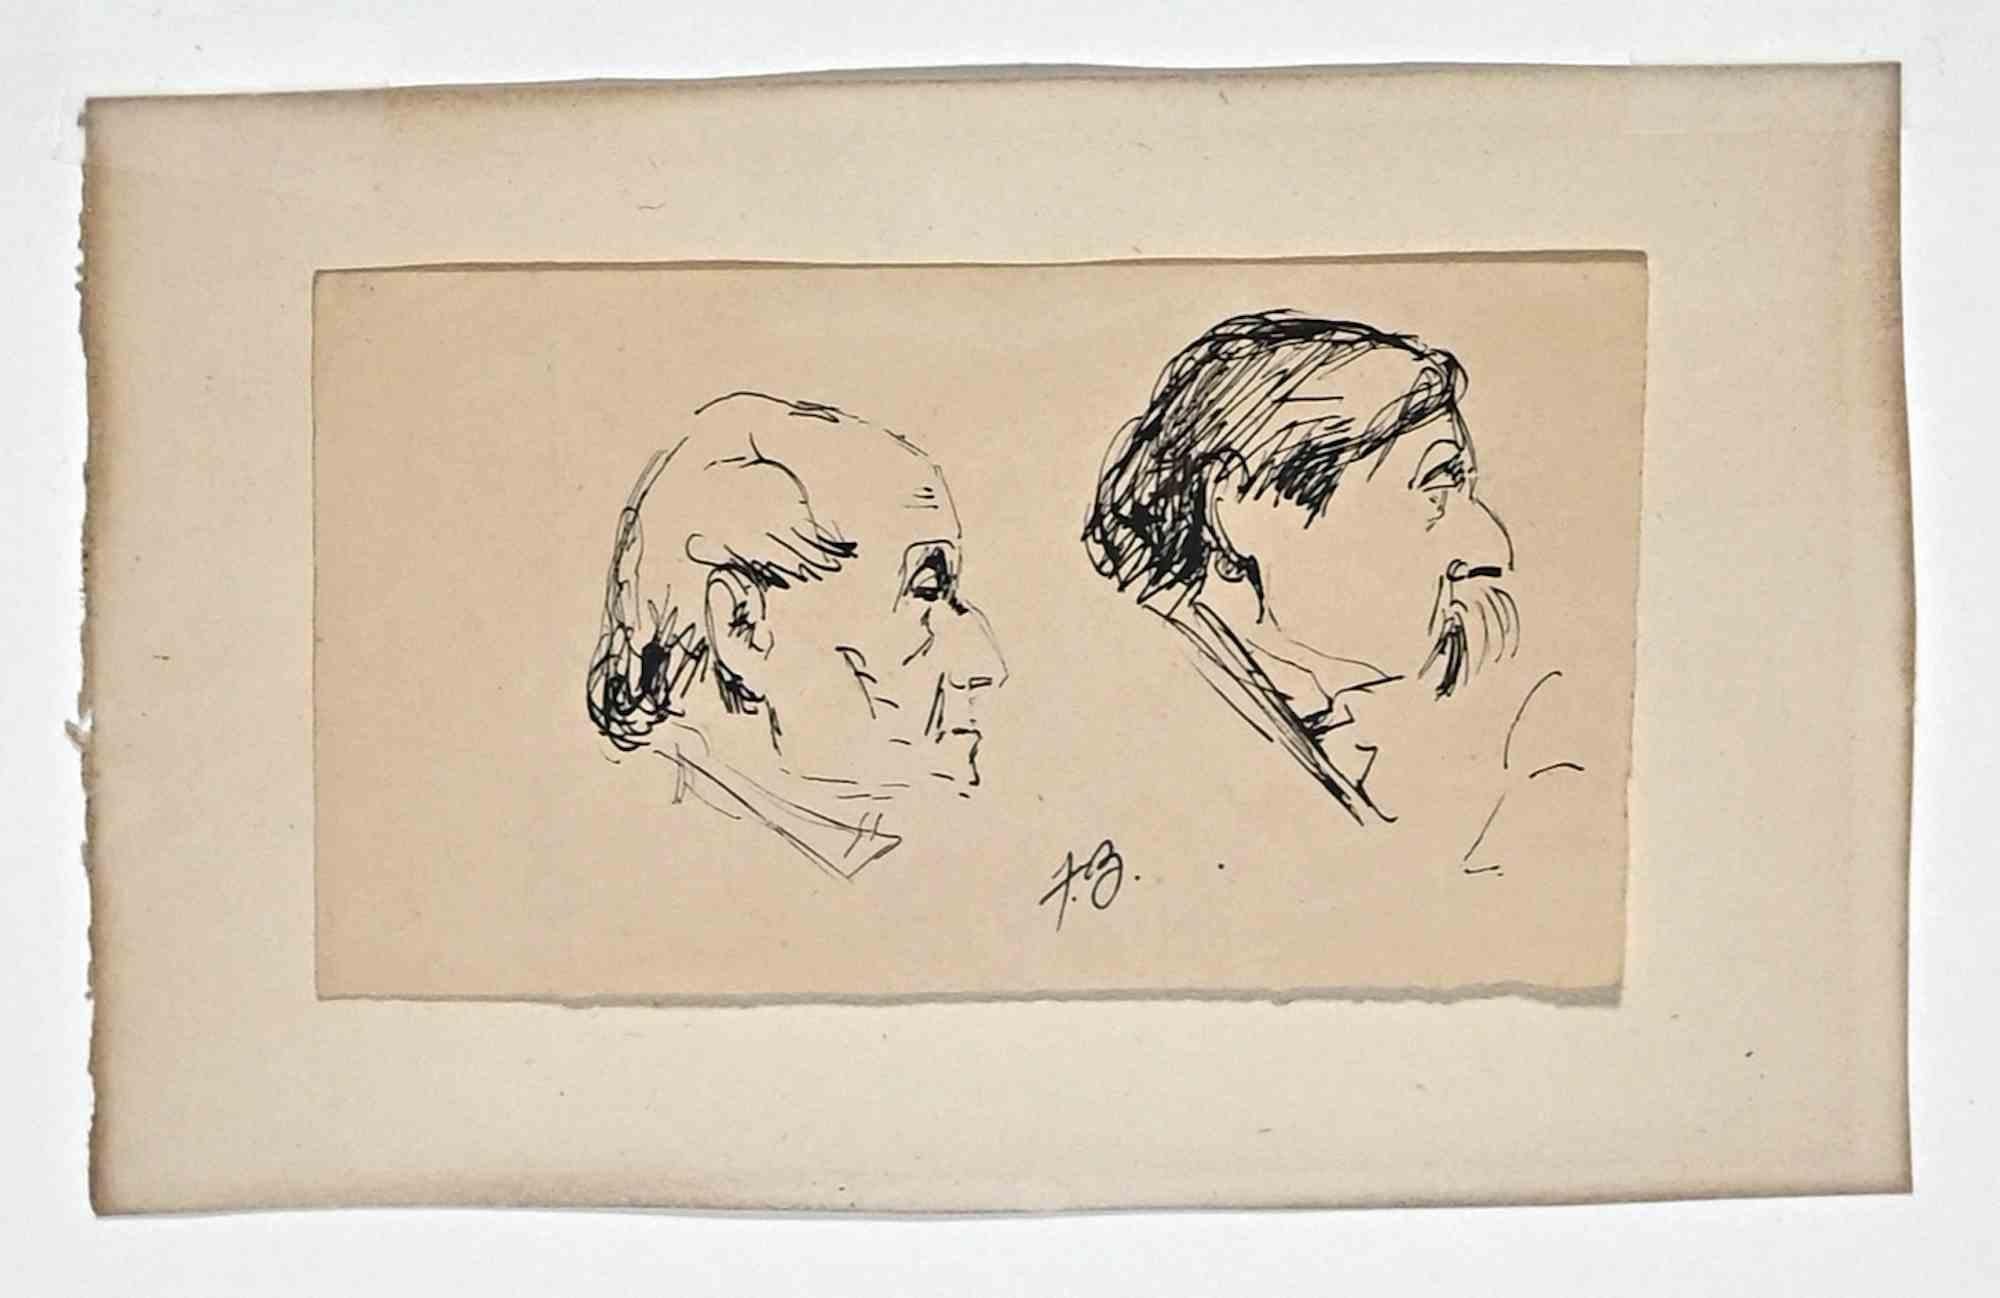 Portraits is a drawing in China ink on paper realized in the late 19th Century by Félix-Joseph Barrias.

Monogrammed on the lower center.

Included a Passepartout: 33 x 50 cm

Good conditions.

The artwork is depicted through soft and short